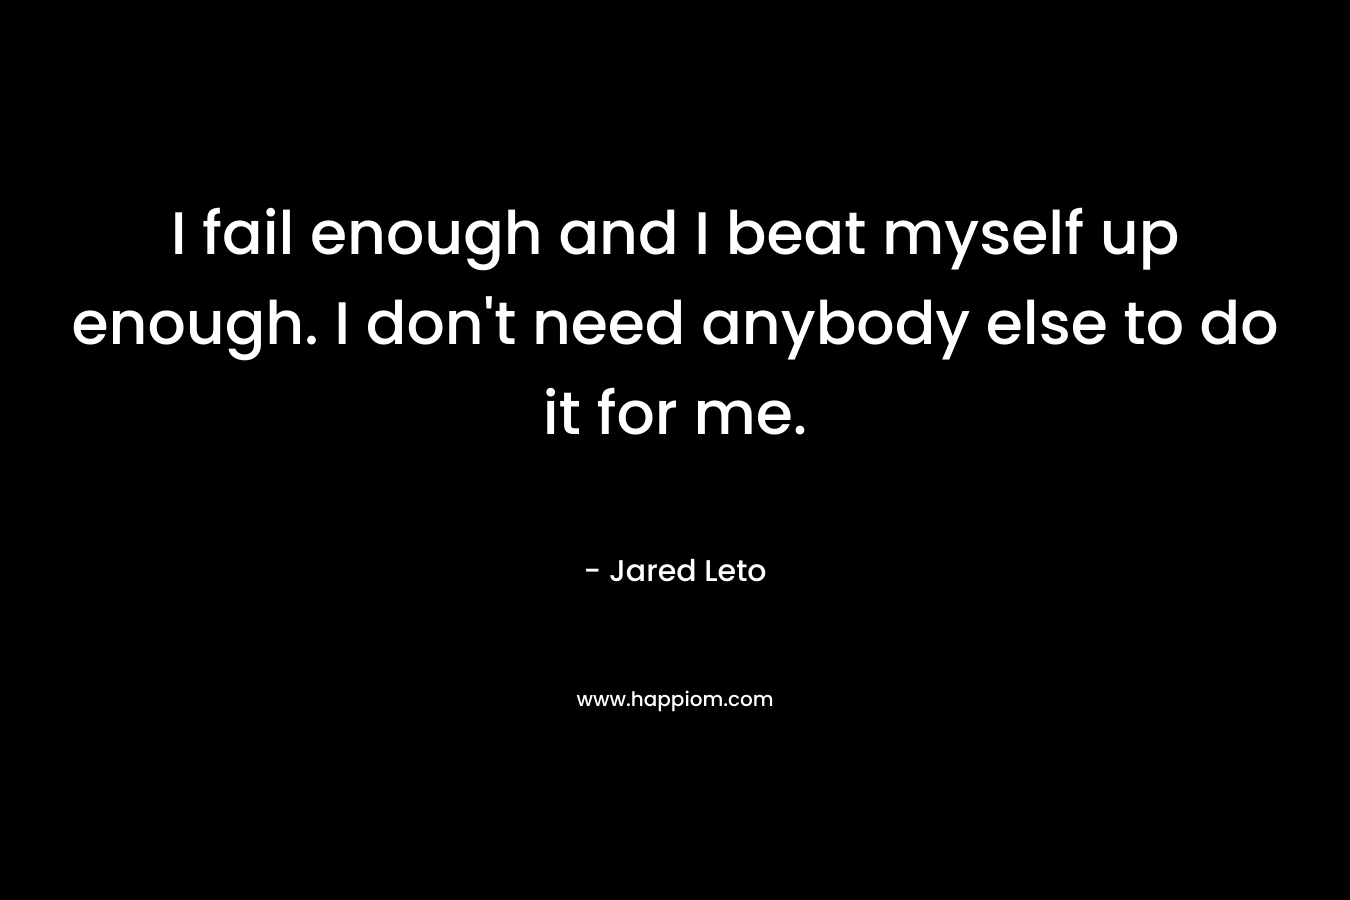 I fail enough and I beat myself up enough. I don't need anybody else to do it for me.